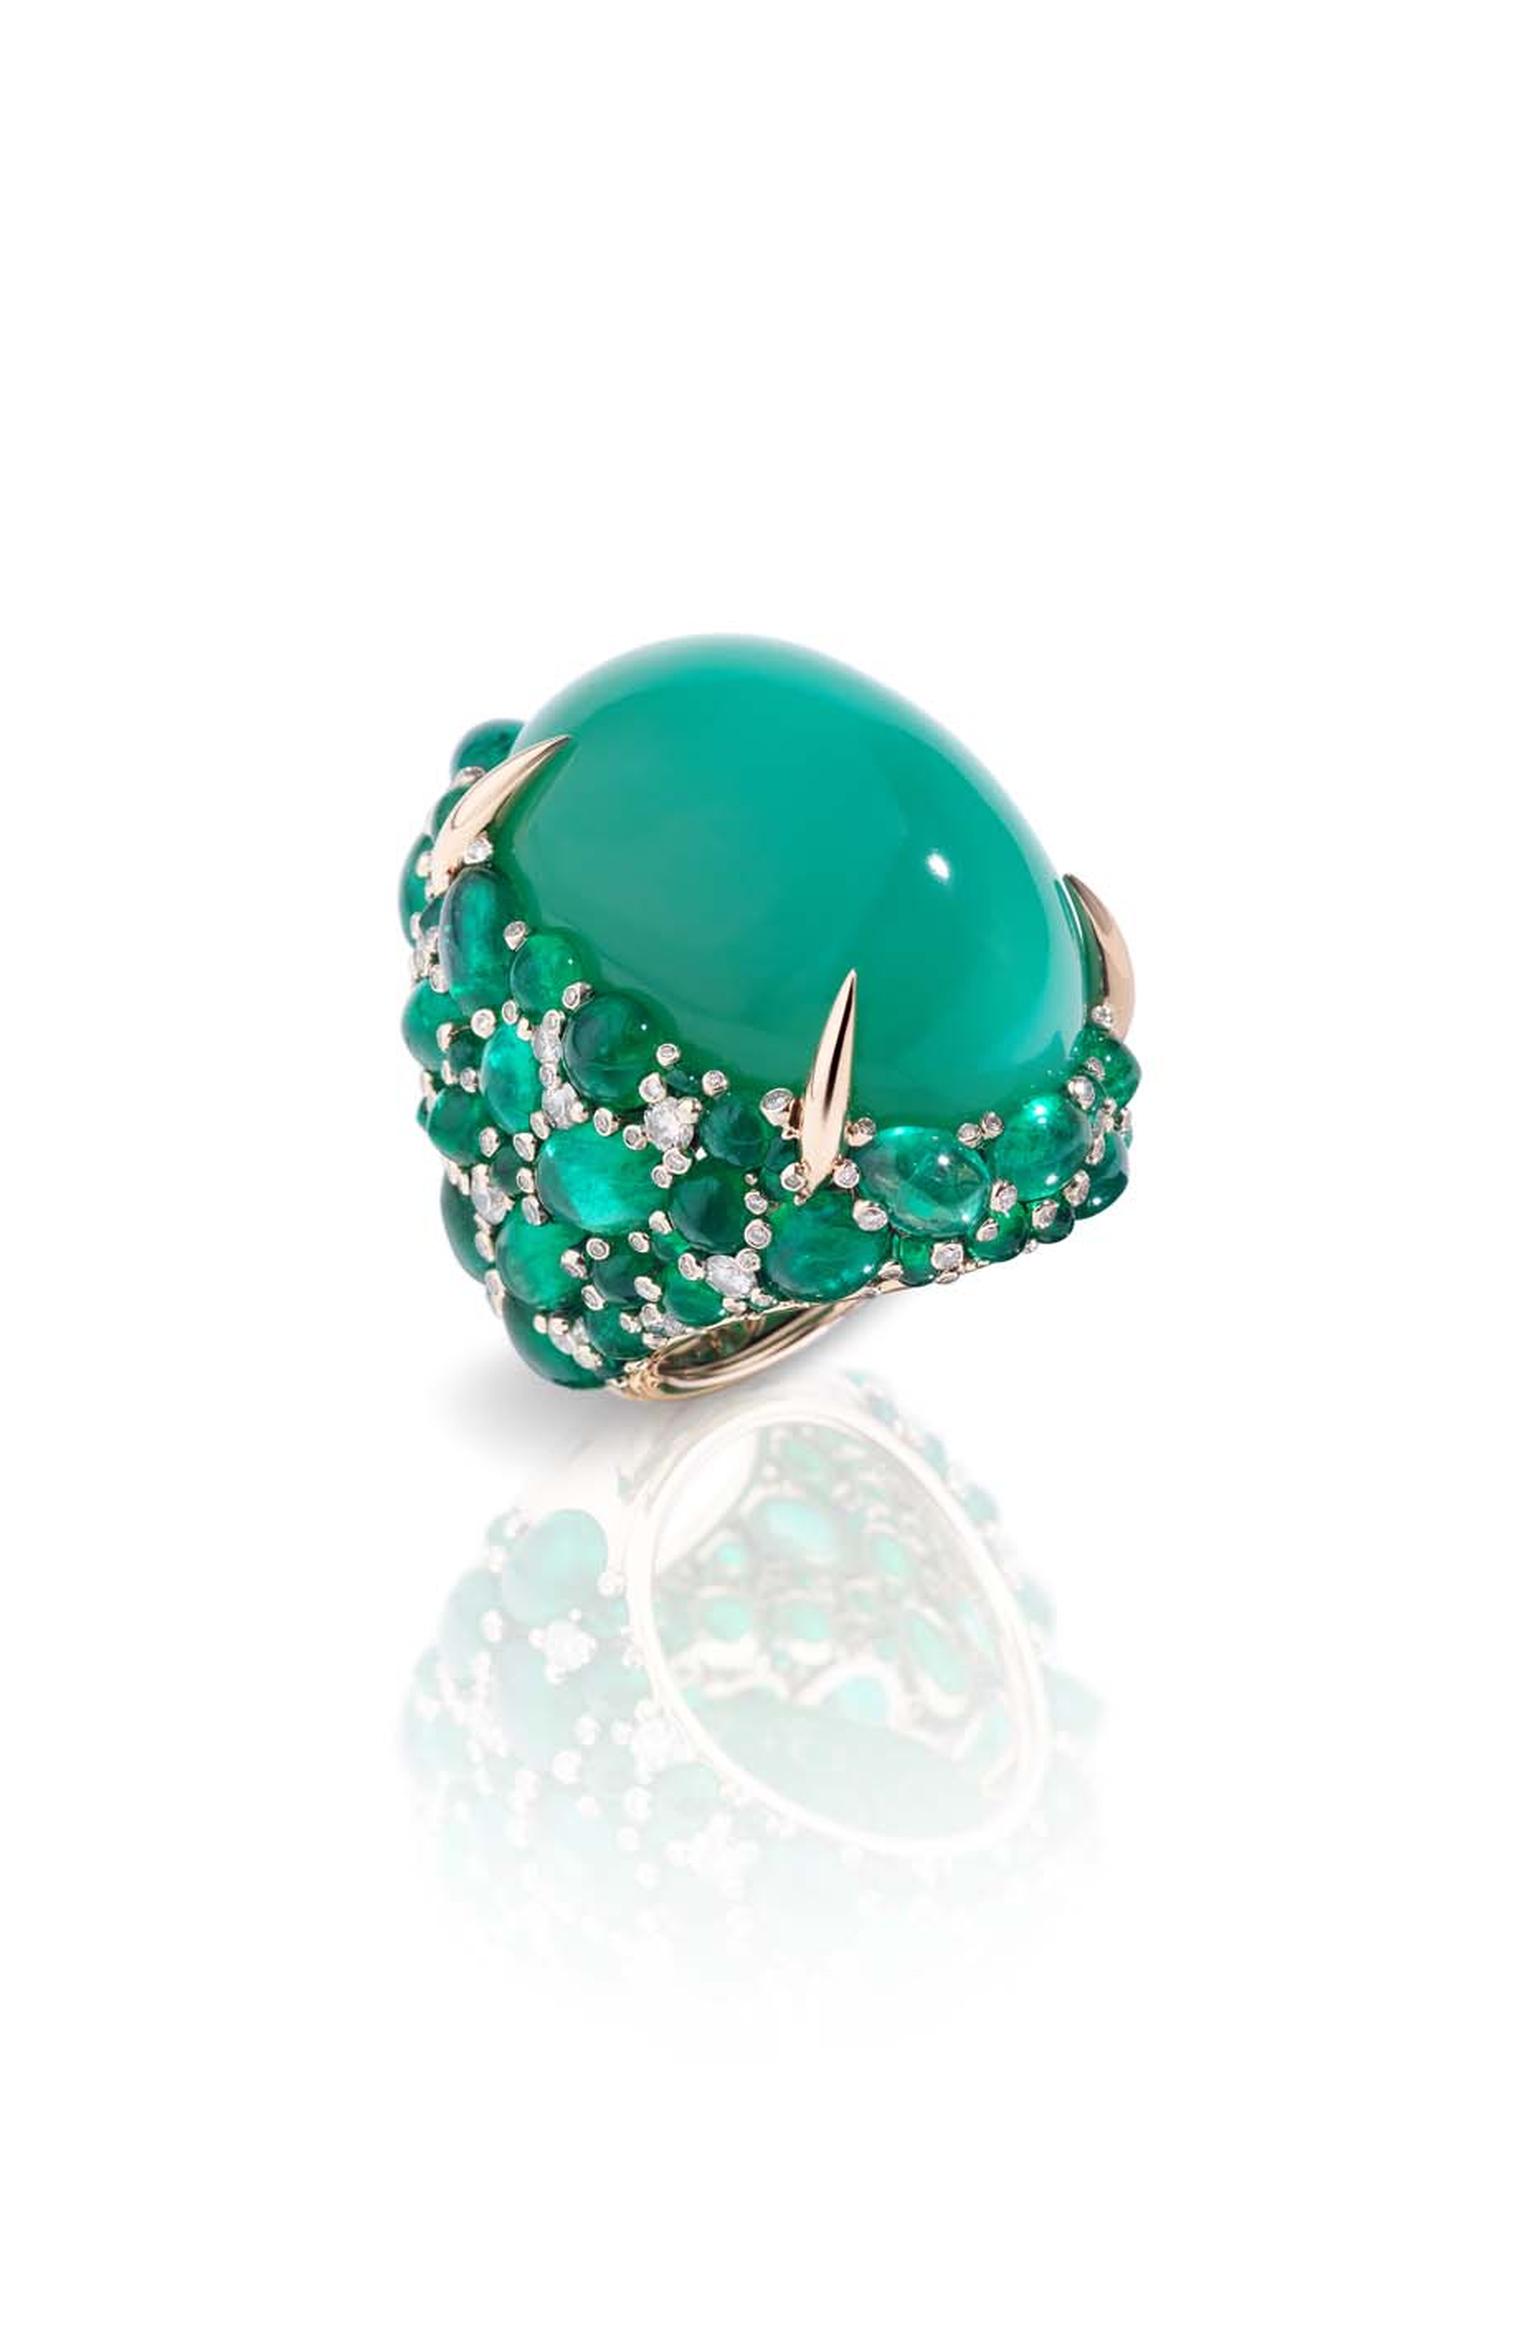 Pomellato Pom Pom griffe ring featuring a green chrysoprase surrounded by cabochon emeralds and diamonds.